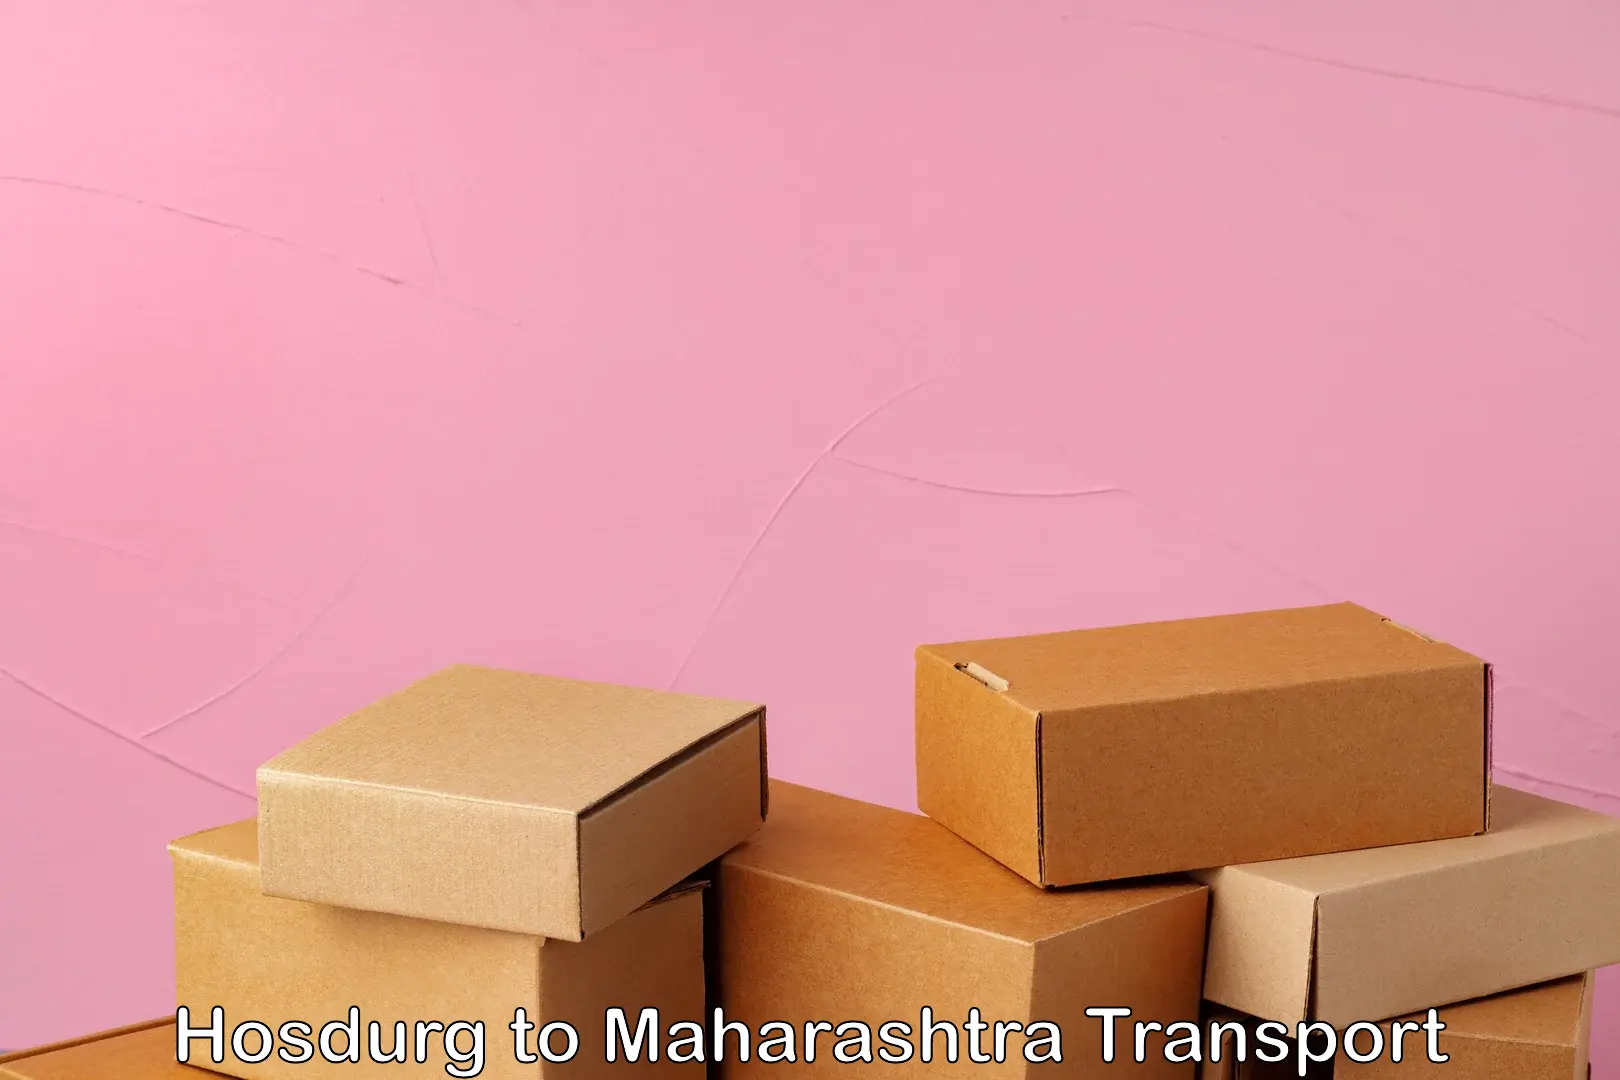 Transport bike from one state to another Hosdurg to Maharashtra